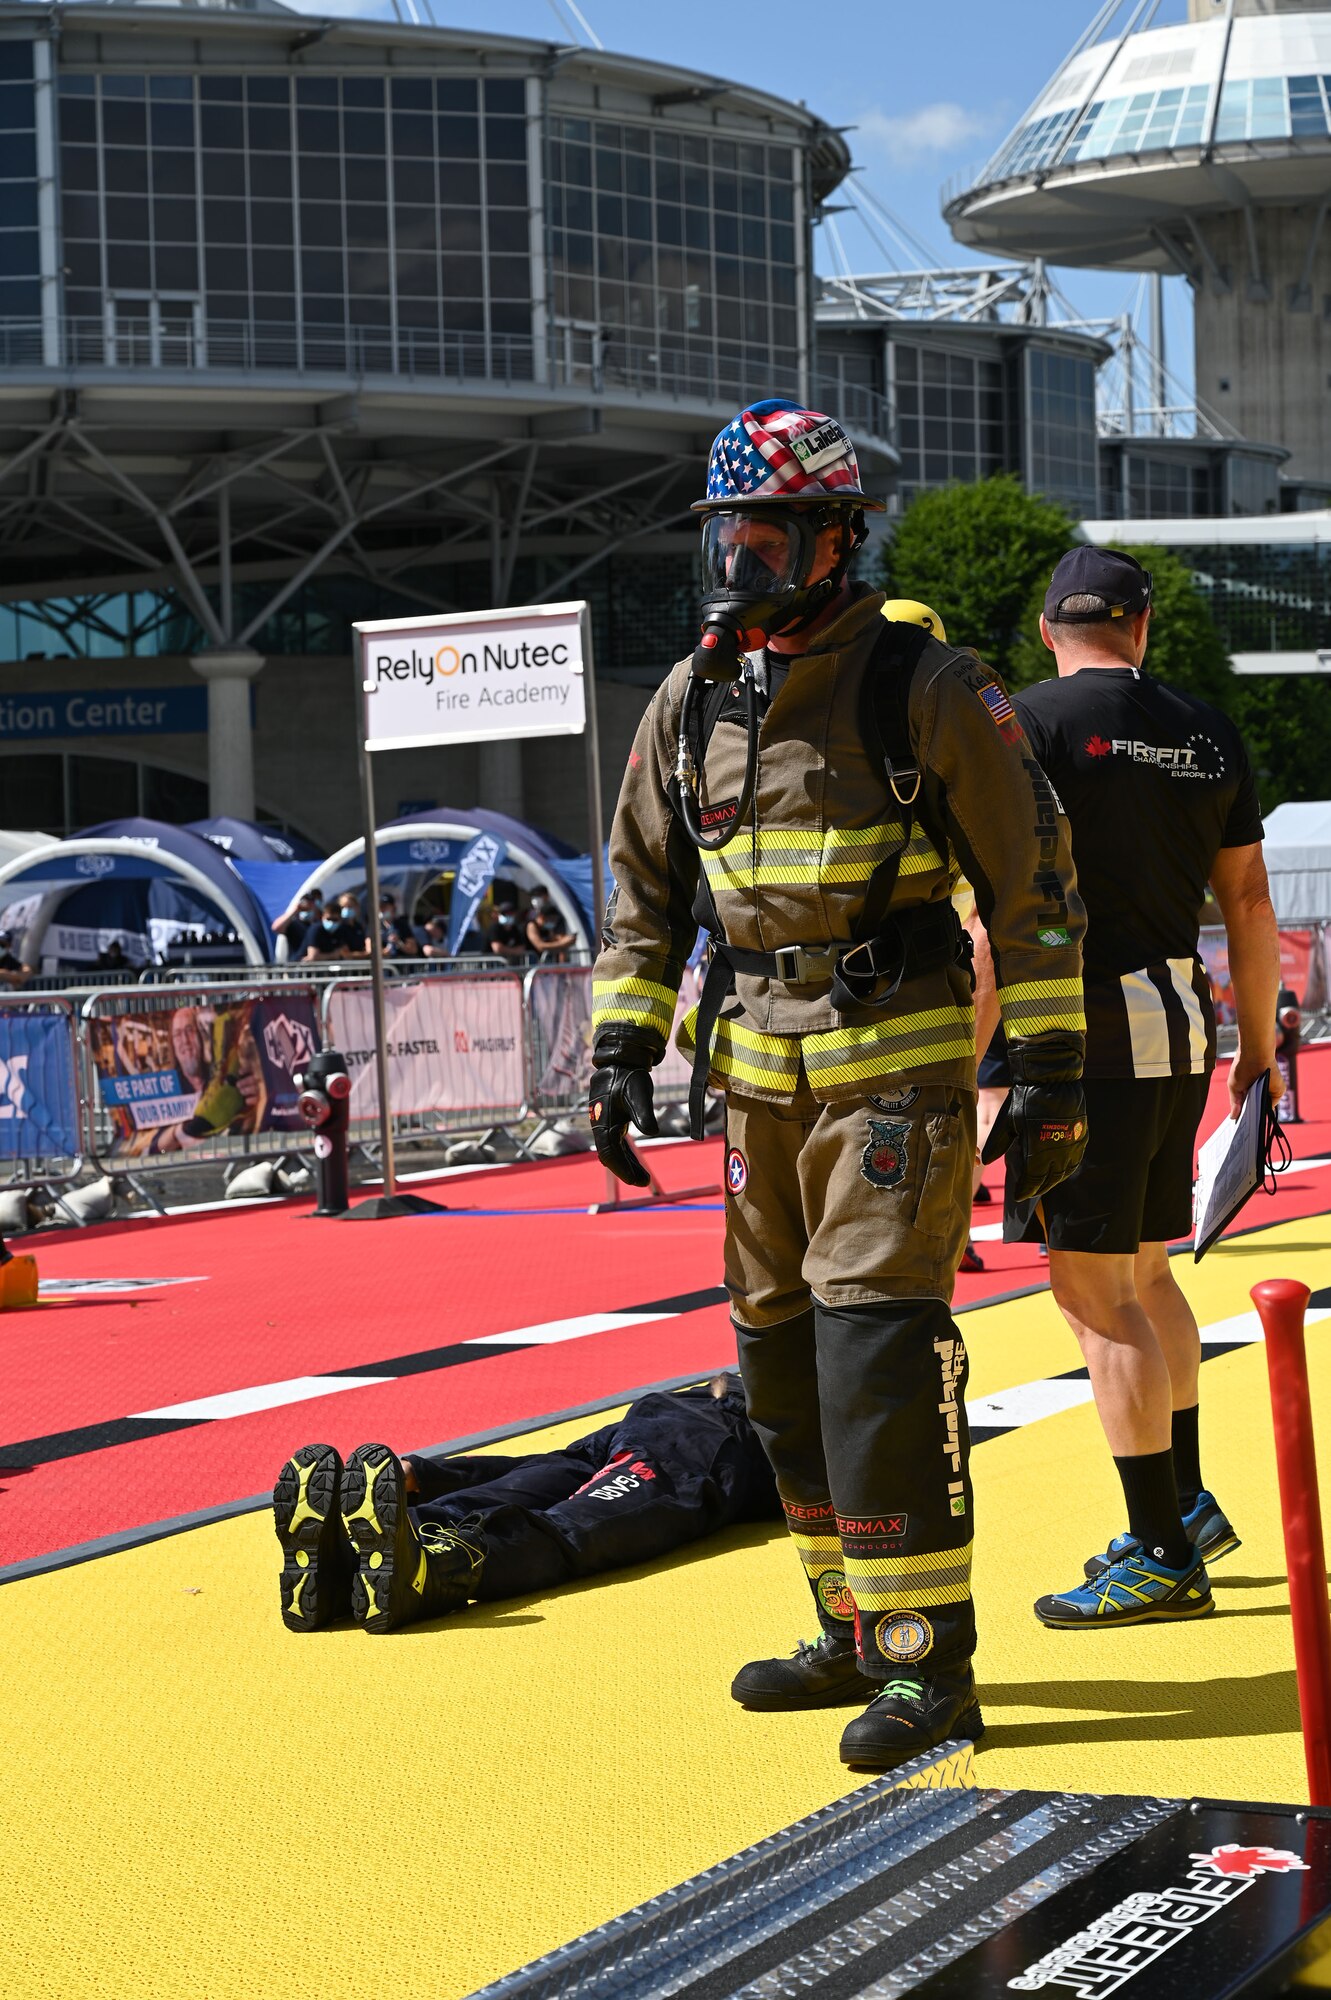 Master Sgt. Sean Sullivan, assistant chief of training in the 445th Civil Engineer Squadron, puts on his gear before competing in the FireFit Europe Championships June 20, 2021 in Hannover, Germany. Amid 400 contenders, Sullivan ranked first in the over-40 age category, and eighth overall. He travelled from Frankfort, Kentucky, to compete in the multiday event. (U.S. Air Force photo/Capt. Rachel Ingram)